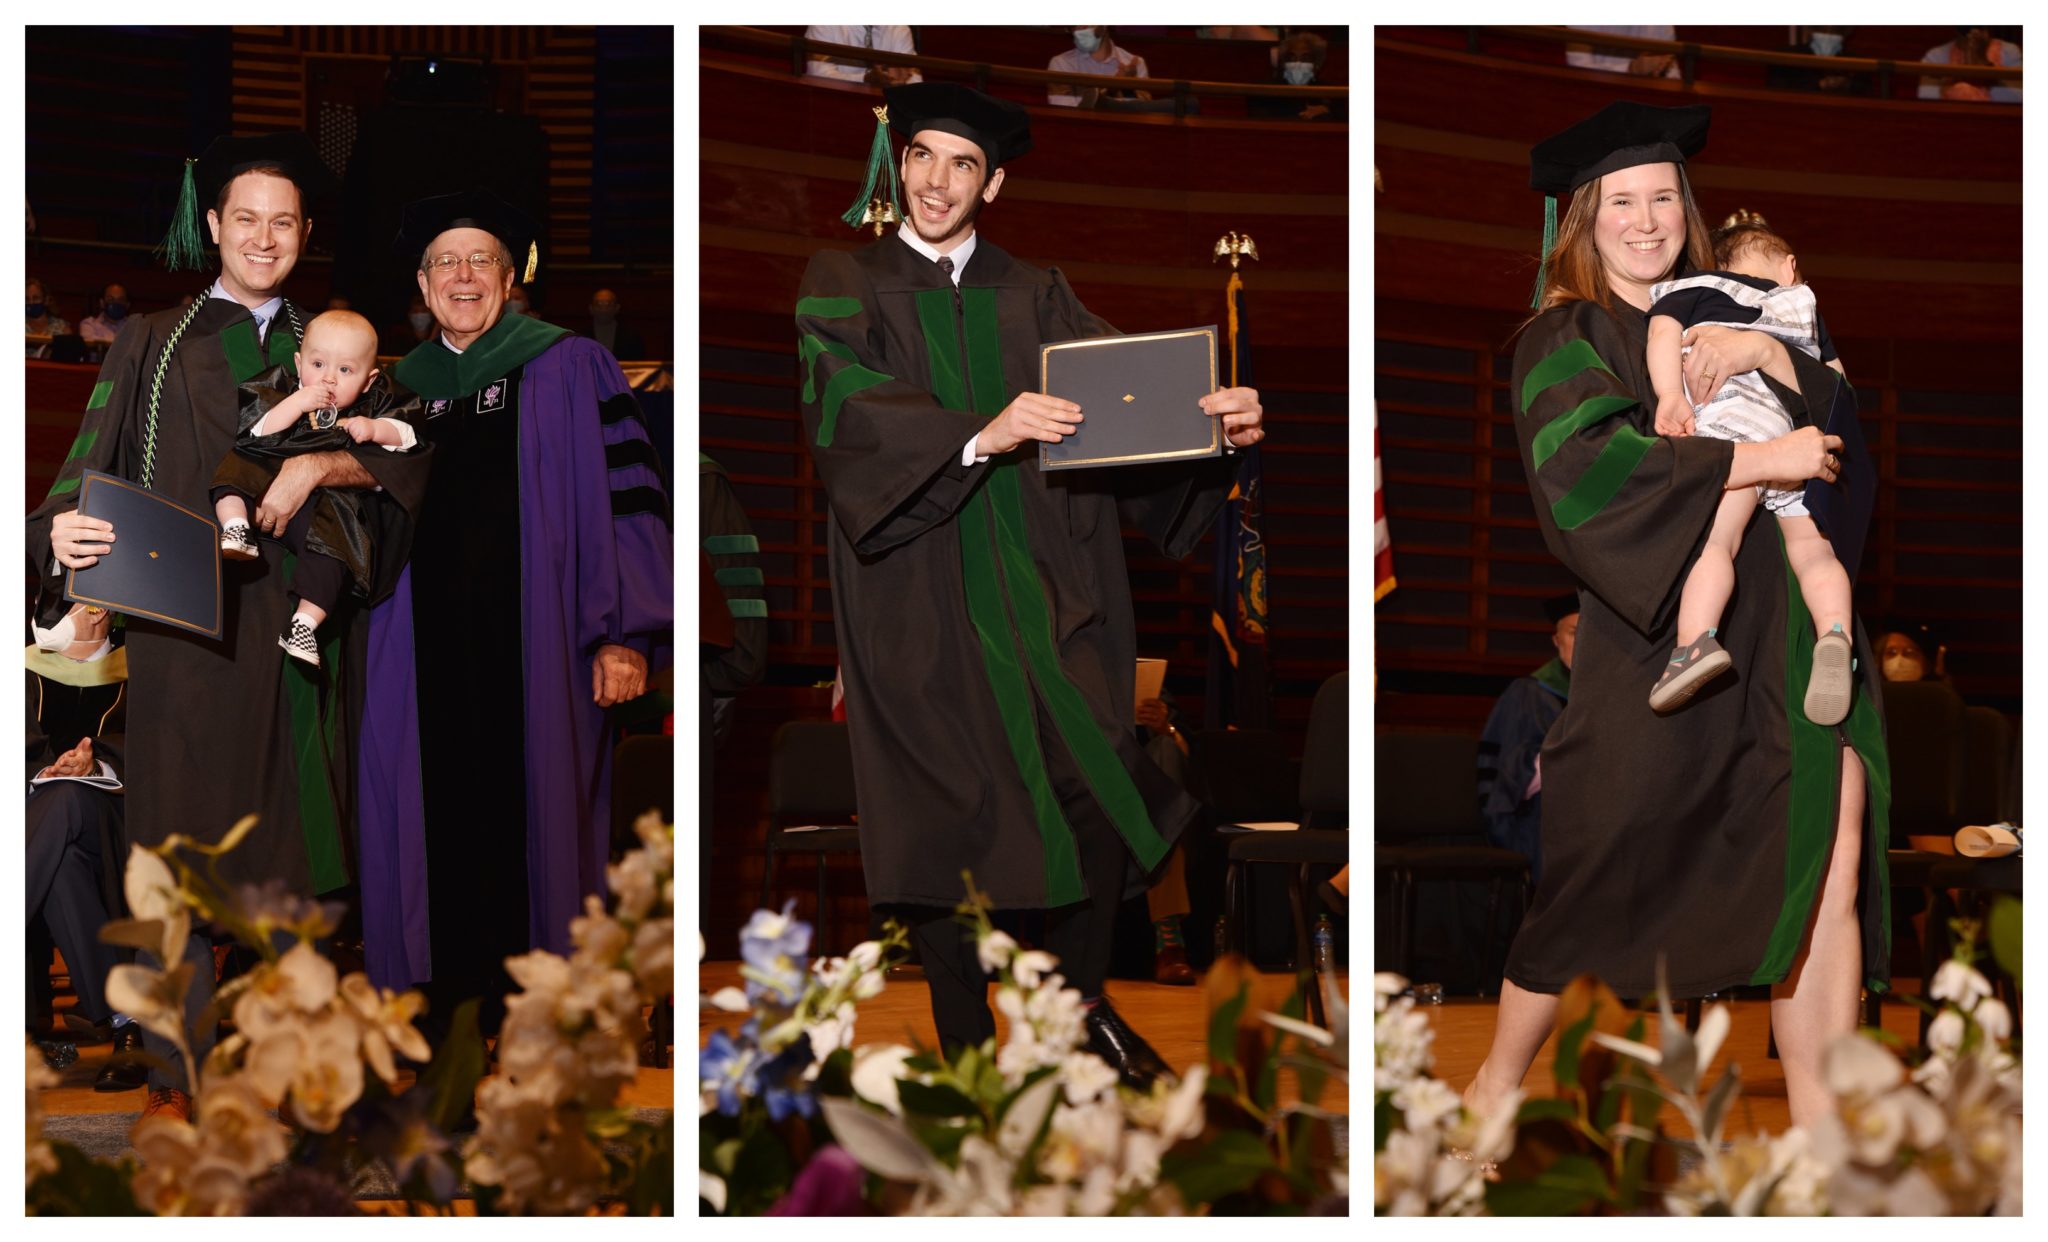 Sidney Kimmel Medical College graduates (l-r) included Martin Morris, Kyle Rodgers and Alexandra Melo.